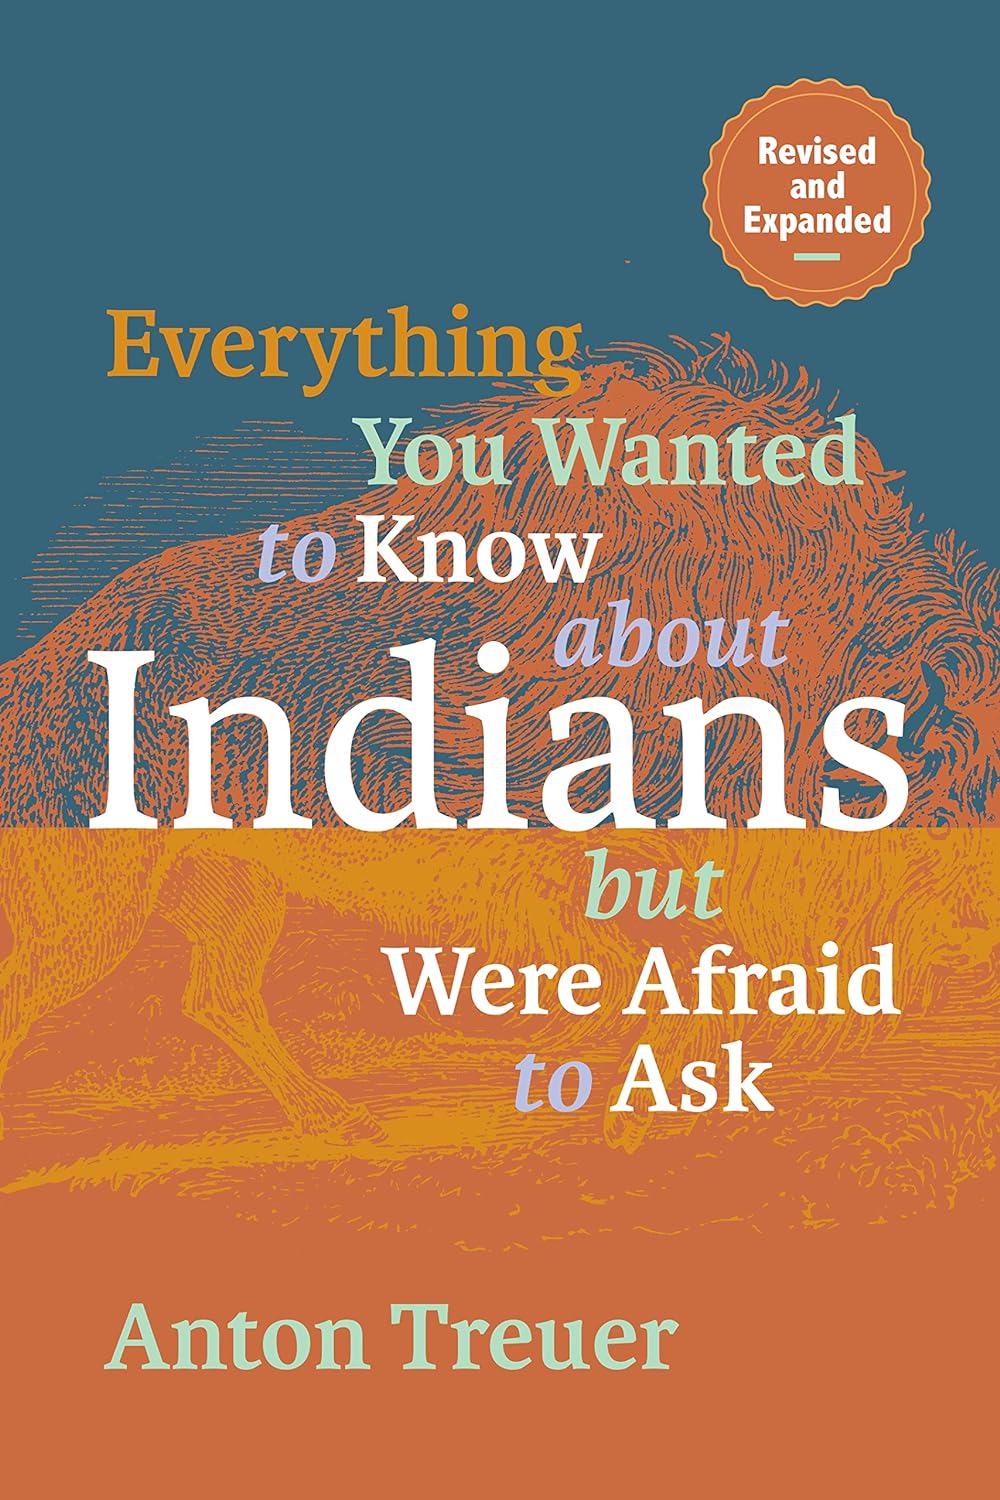 Everything You Wanted to Know About Indians But Were Afraid to Ask: Revised and Expanded Paperback